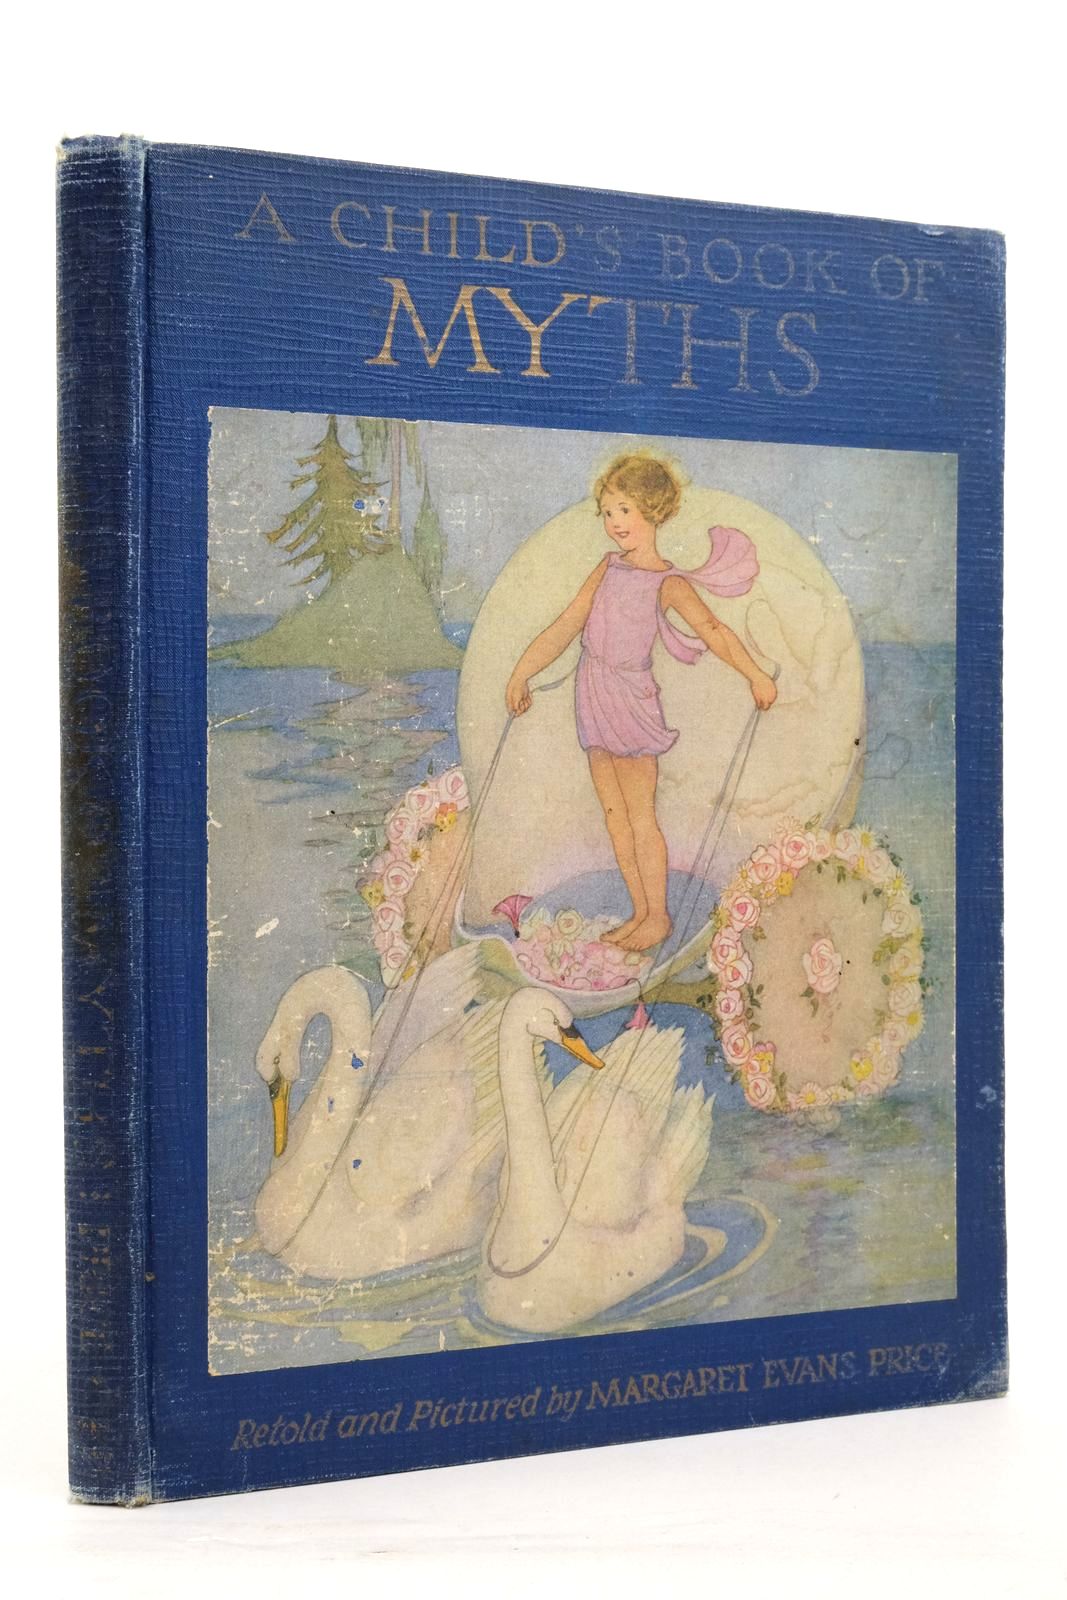 Photo of A CHILD'S BOOK OF MYTHS written by Price, Margaret Evans
Bates, Katharine Lee illustrated by Price, Margaret Evans published by Rand McNally & Company (STOCK CODE: 2137936)  for sale by Stella & Rose's Books